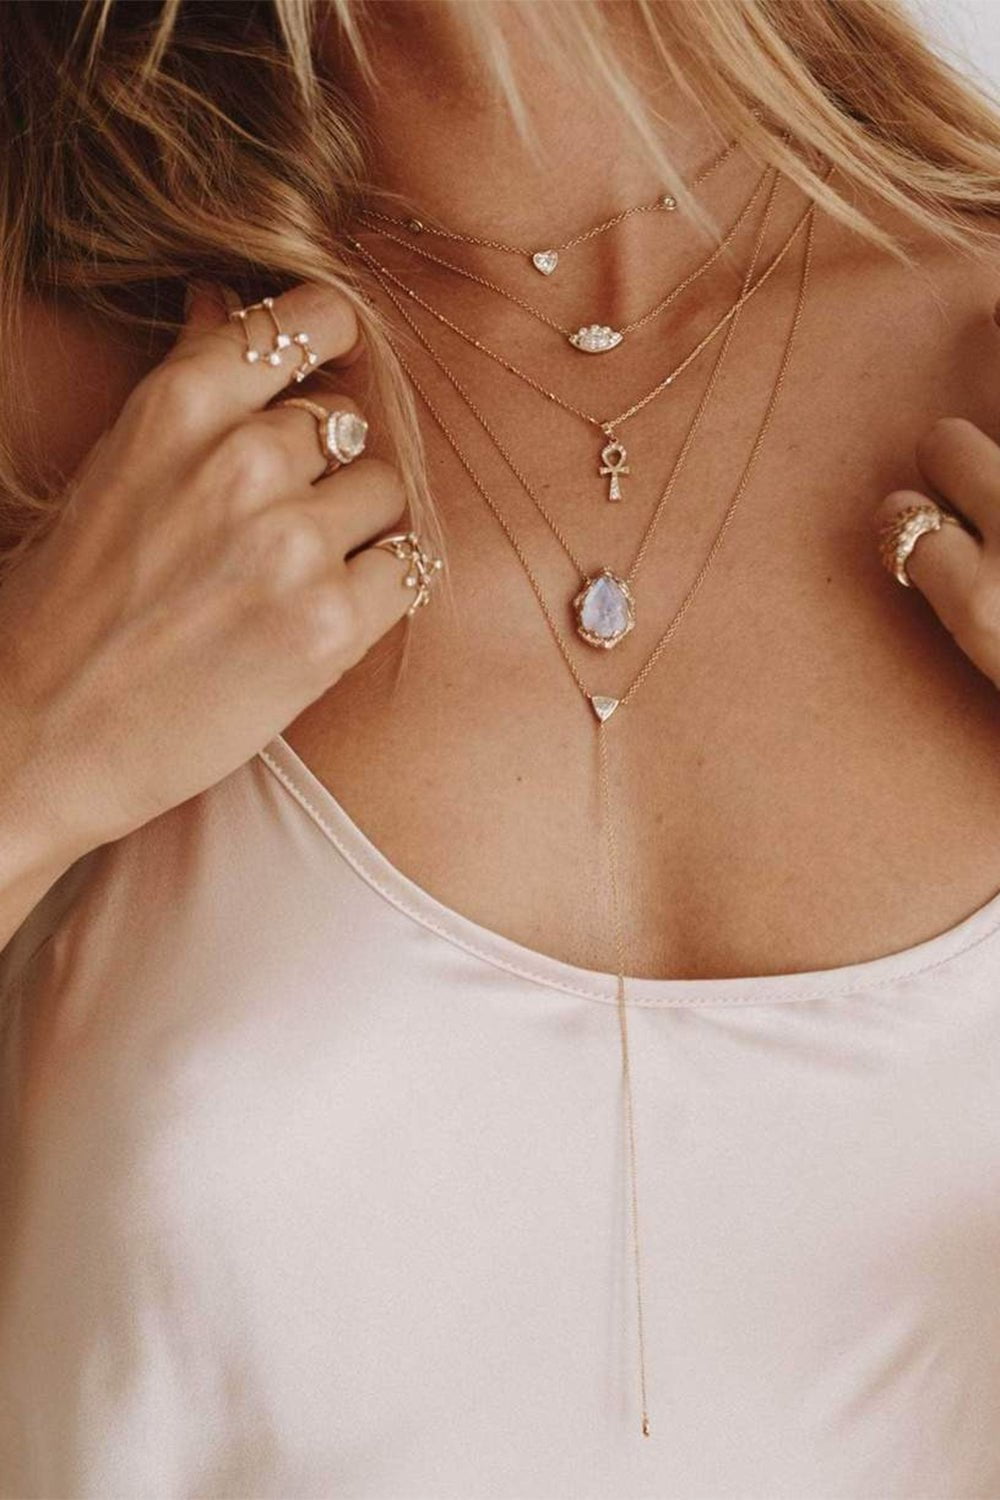 LOGAN HOLLOWELL-Queen Water Drop Moonstone Necklace with Sprinkled Diamonds-